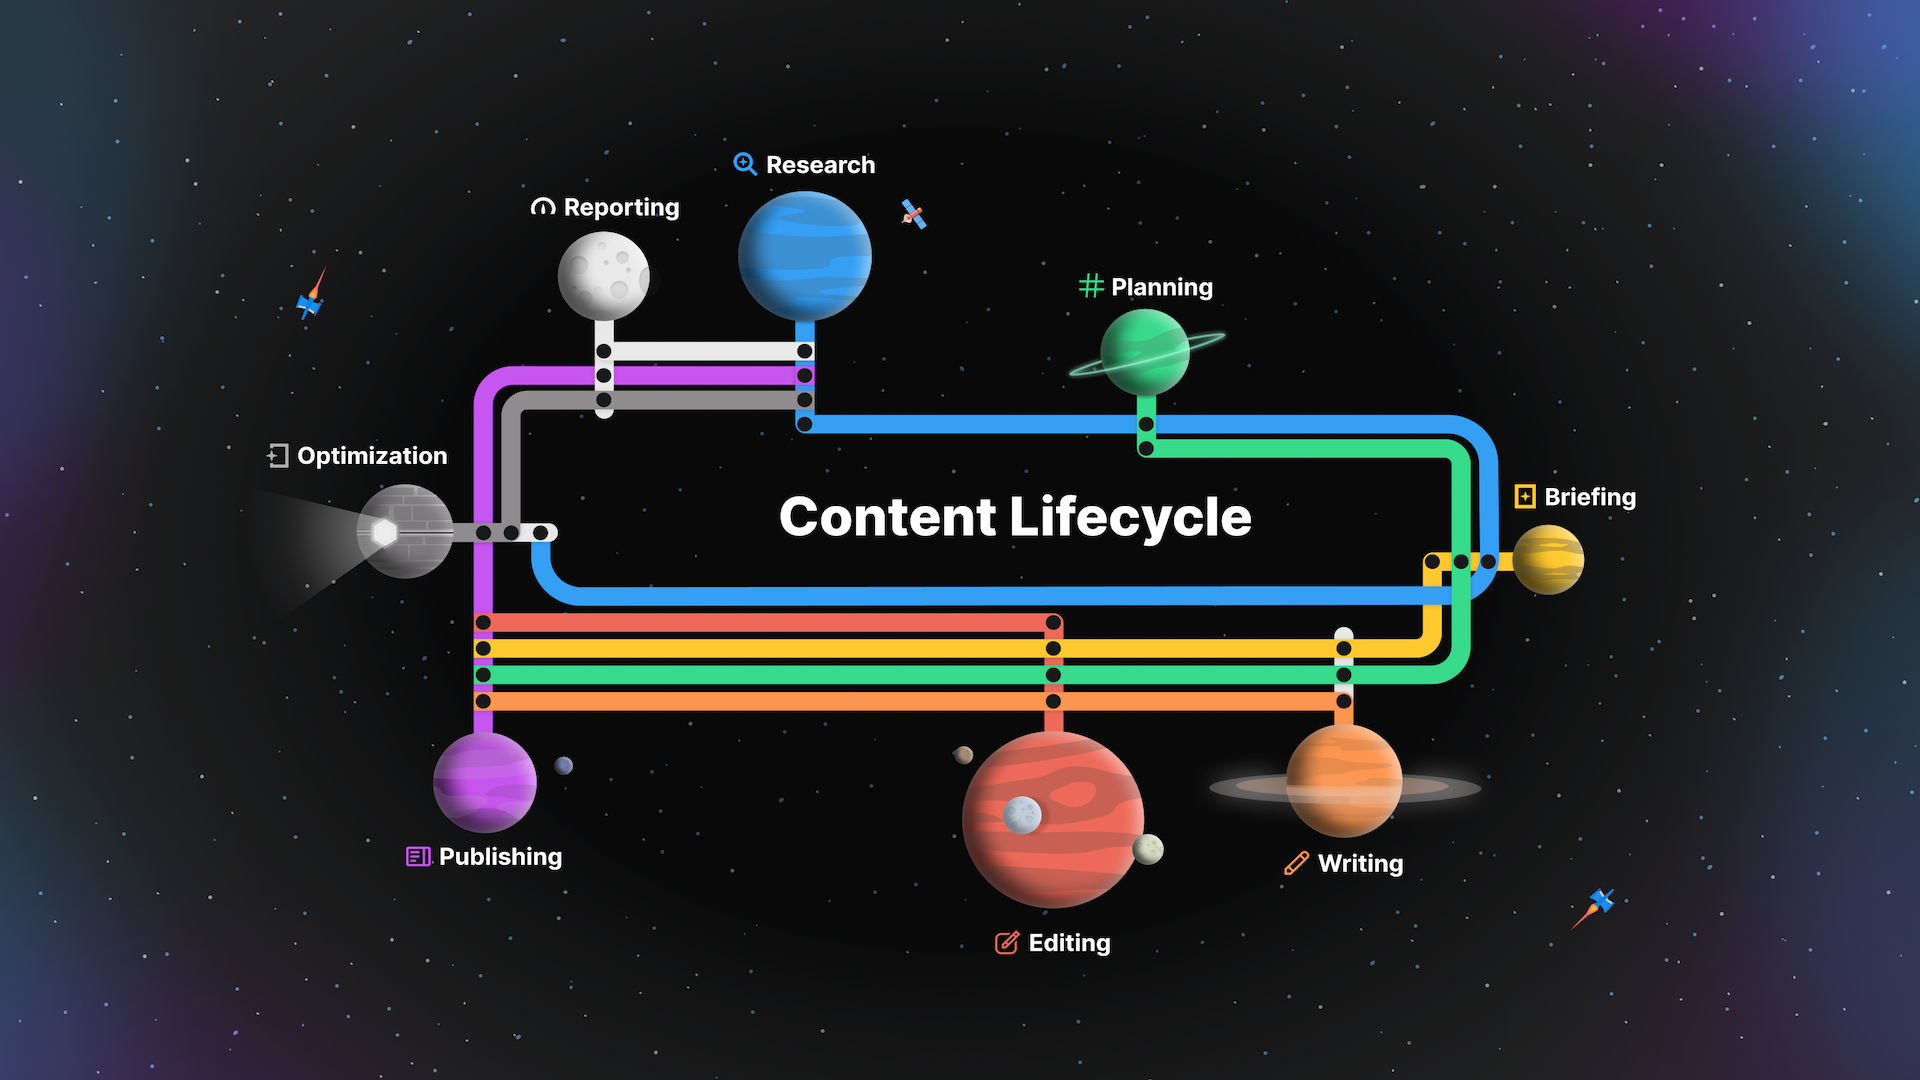 MarketMuse content lifecycle showing the eight steps of research, planning, briefing, writing, editing, publishing, optimization, and reporting.